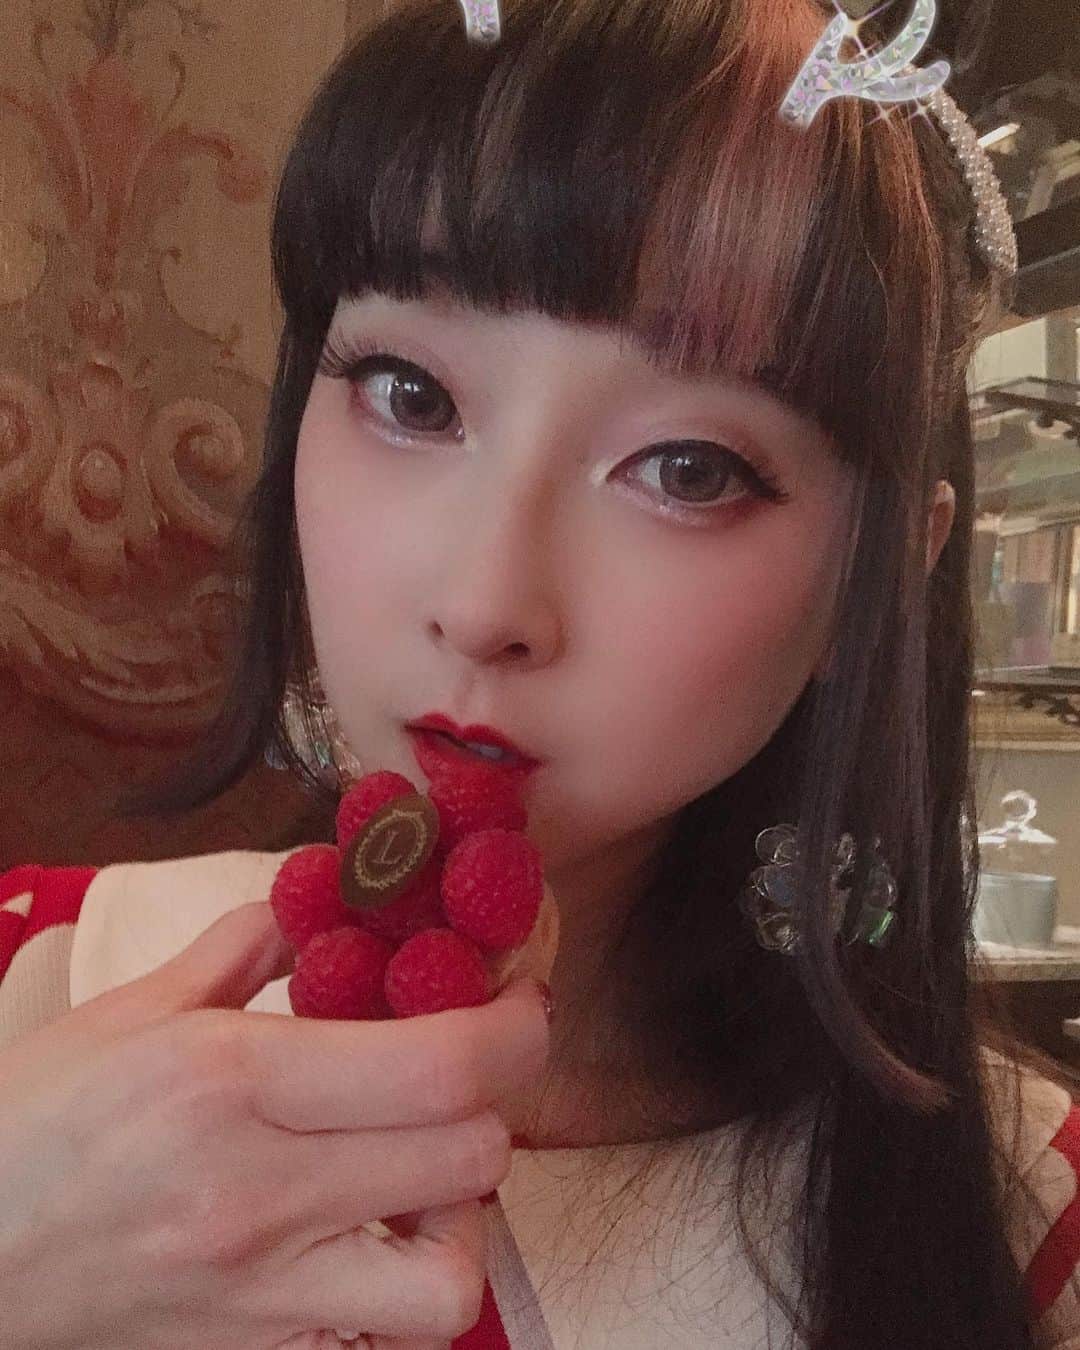 RinRinさんのインスタグラム写真 - (RinRinInstagram)「Parisian Foods 🤤 throwback to all the foods I ate during my trip back in December~ everyday so fancy and delicious!  パリで毎日食べ物が豪華✨ . . At Laduree, we went in around noon hearing that they had a special Christmas menu set.  We found out there that it was only available for brunch, but the chef was willing to make it for us.  Too kind 😭 and so delicious 😋 ラデュレでクリスマス限定メニューがあるって聞いてお昼に行ってみたら、結局朝で終わってしまったみたいけど、特別に作ってくれました。本当に優しすぎる😩💕 . . Ate at Angelina for the first time, the seating area was beautiful and the food delicious. I wanted to try their chestnut montblanc but was more tempted by their salmon and French toast set 😋 アンジェリーナで初めて食べてきた〜インテリアも素敵で、食べ物めっちゃ美味しかった〜有名なモンブラン食べるつもりだったけど、結局ブランチセットのサーモンとフレンチトーストに引かれてしまった…今度モンブランにする！😂 . . For Thoumieux, it was a buffet type brunch~ so many delicious French cuisine choices! I immediately ate and forgot to take photos😂 I tried so many new foods that day✨ Thoumieuxでブュッフェブランチでした〜定番なフランス料理の選択多くて、ブュッフェだから全部一気に試しできてすごい良かった✨もう食べ物に集中しすぎて写真撮るのを忘れた😂めっちゃ美味しかった！ . . On the last day I ate ramen with the girls at Hakata Choten 🍜 it was so popular we lined up outside in the cold for 30min 😂 it definitely hit the spot, warm and savory🤤 最後の日にみんなとラーメン食べてきた🍜めっちゃ人気なとこで、外寒いのに、30分でも並んでた😂やっぱり美味しかった♪ . . Stay safe everyone 🙏🏻 . . 👉🏻 #rinrininparis . . #rinrindoll #paris #travelparis #laduree #angelina #thoumieux #パリ #旅行 #ラデュレ #アンジェリーナ #パリグルメ #hakatachoten」4月7日 17時31分 - rinrindoll